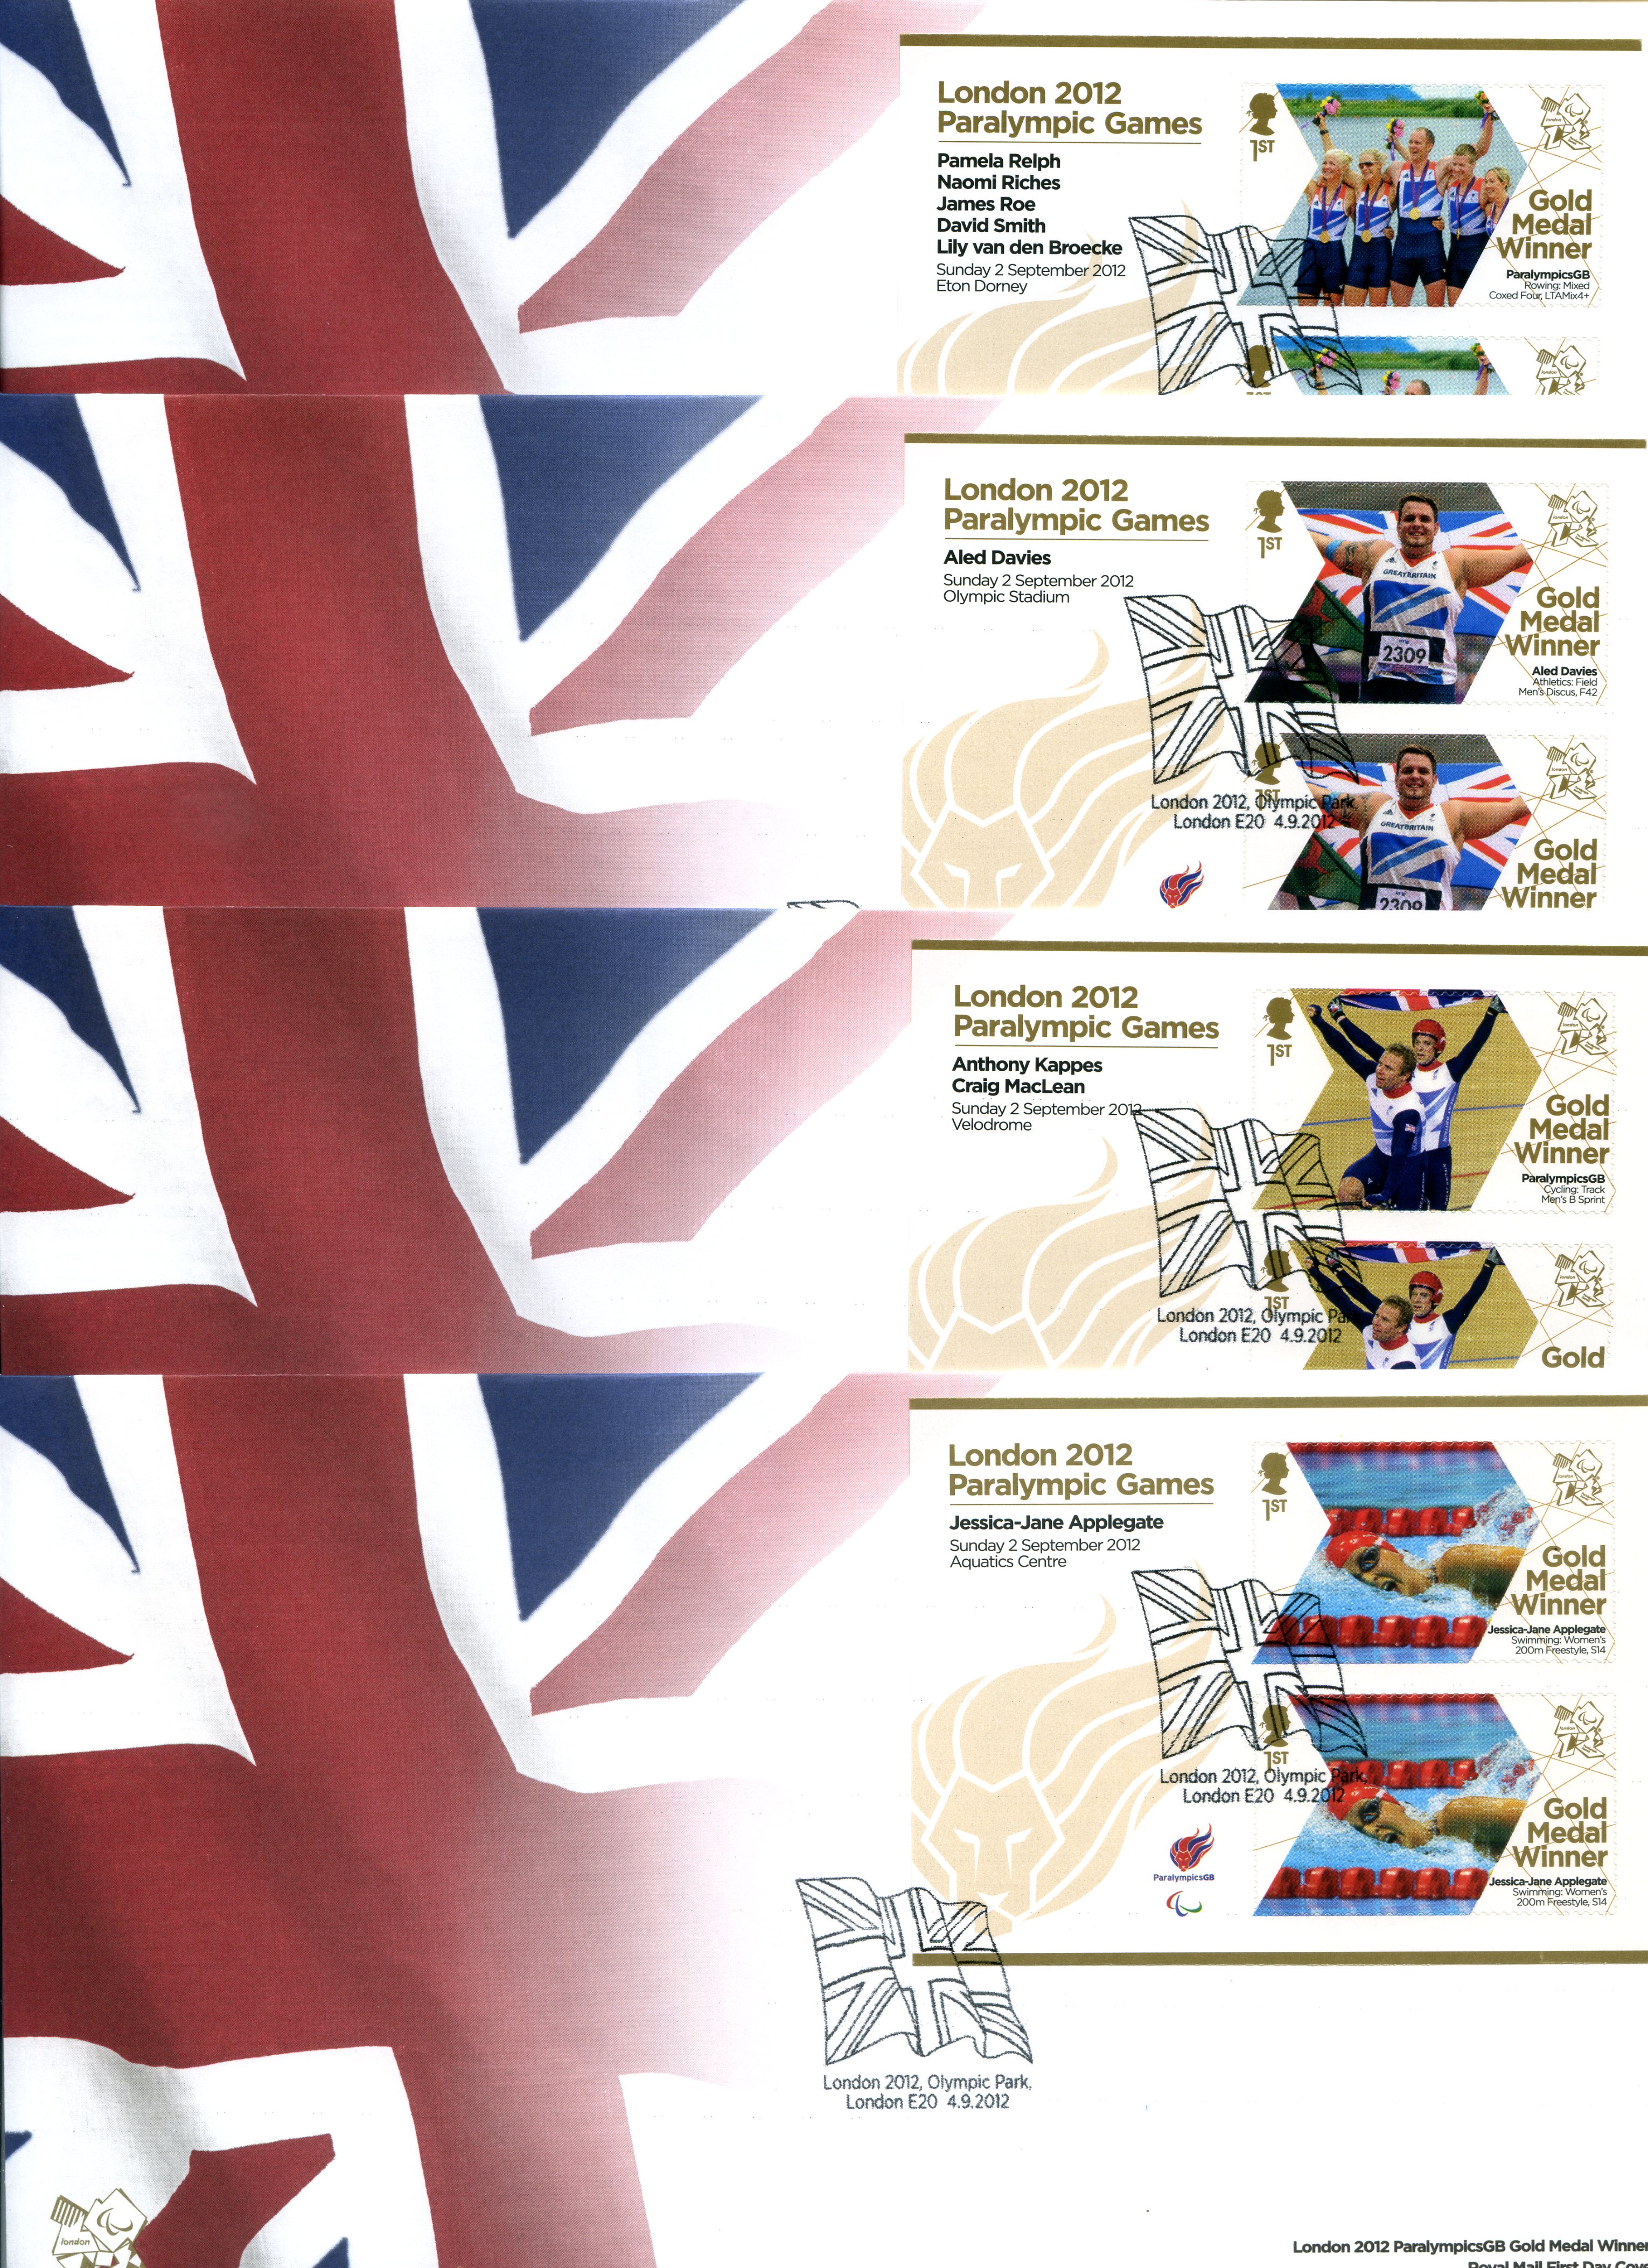 2012 LONDON PARALYMPIC GAMES - FULL SET OF 34 POSTAL COVERS - Image 8 of 9